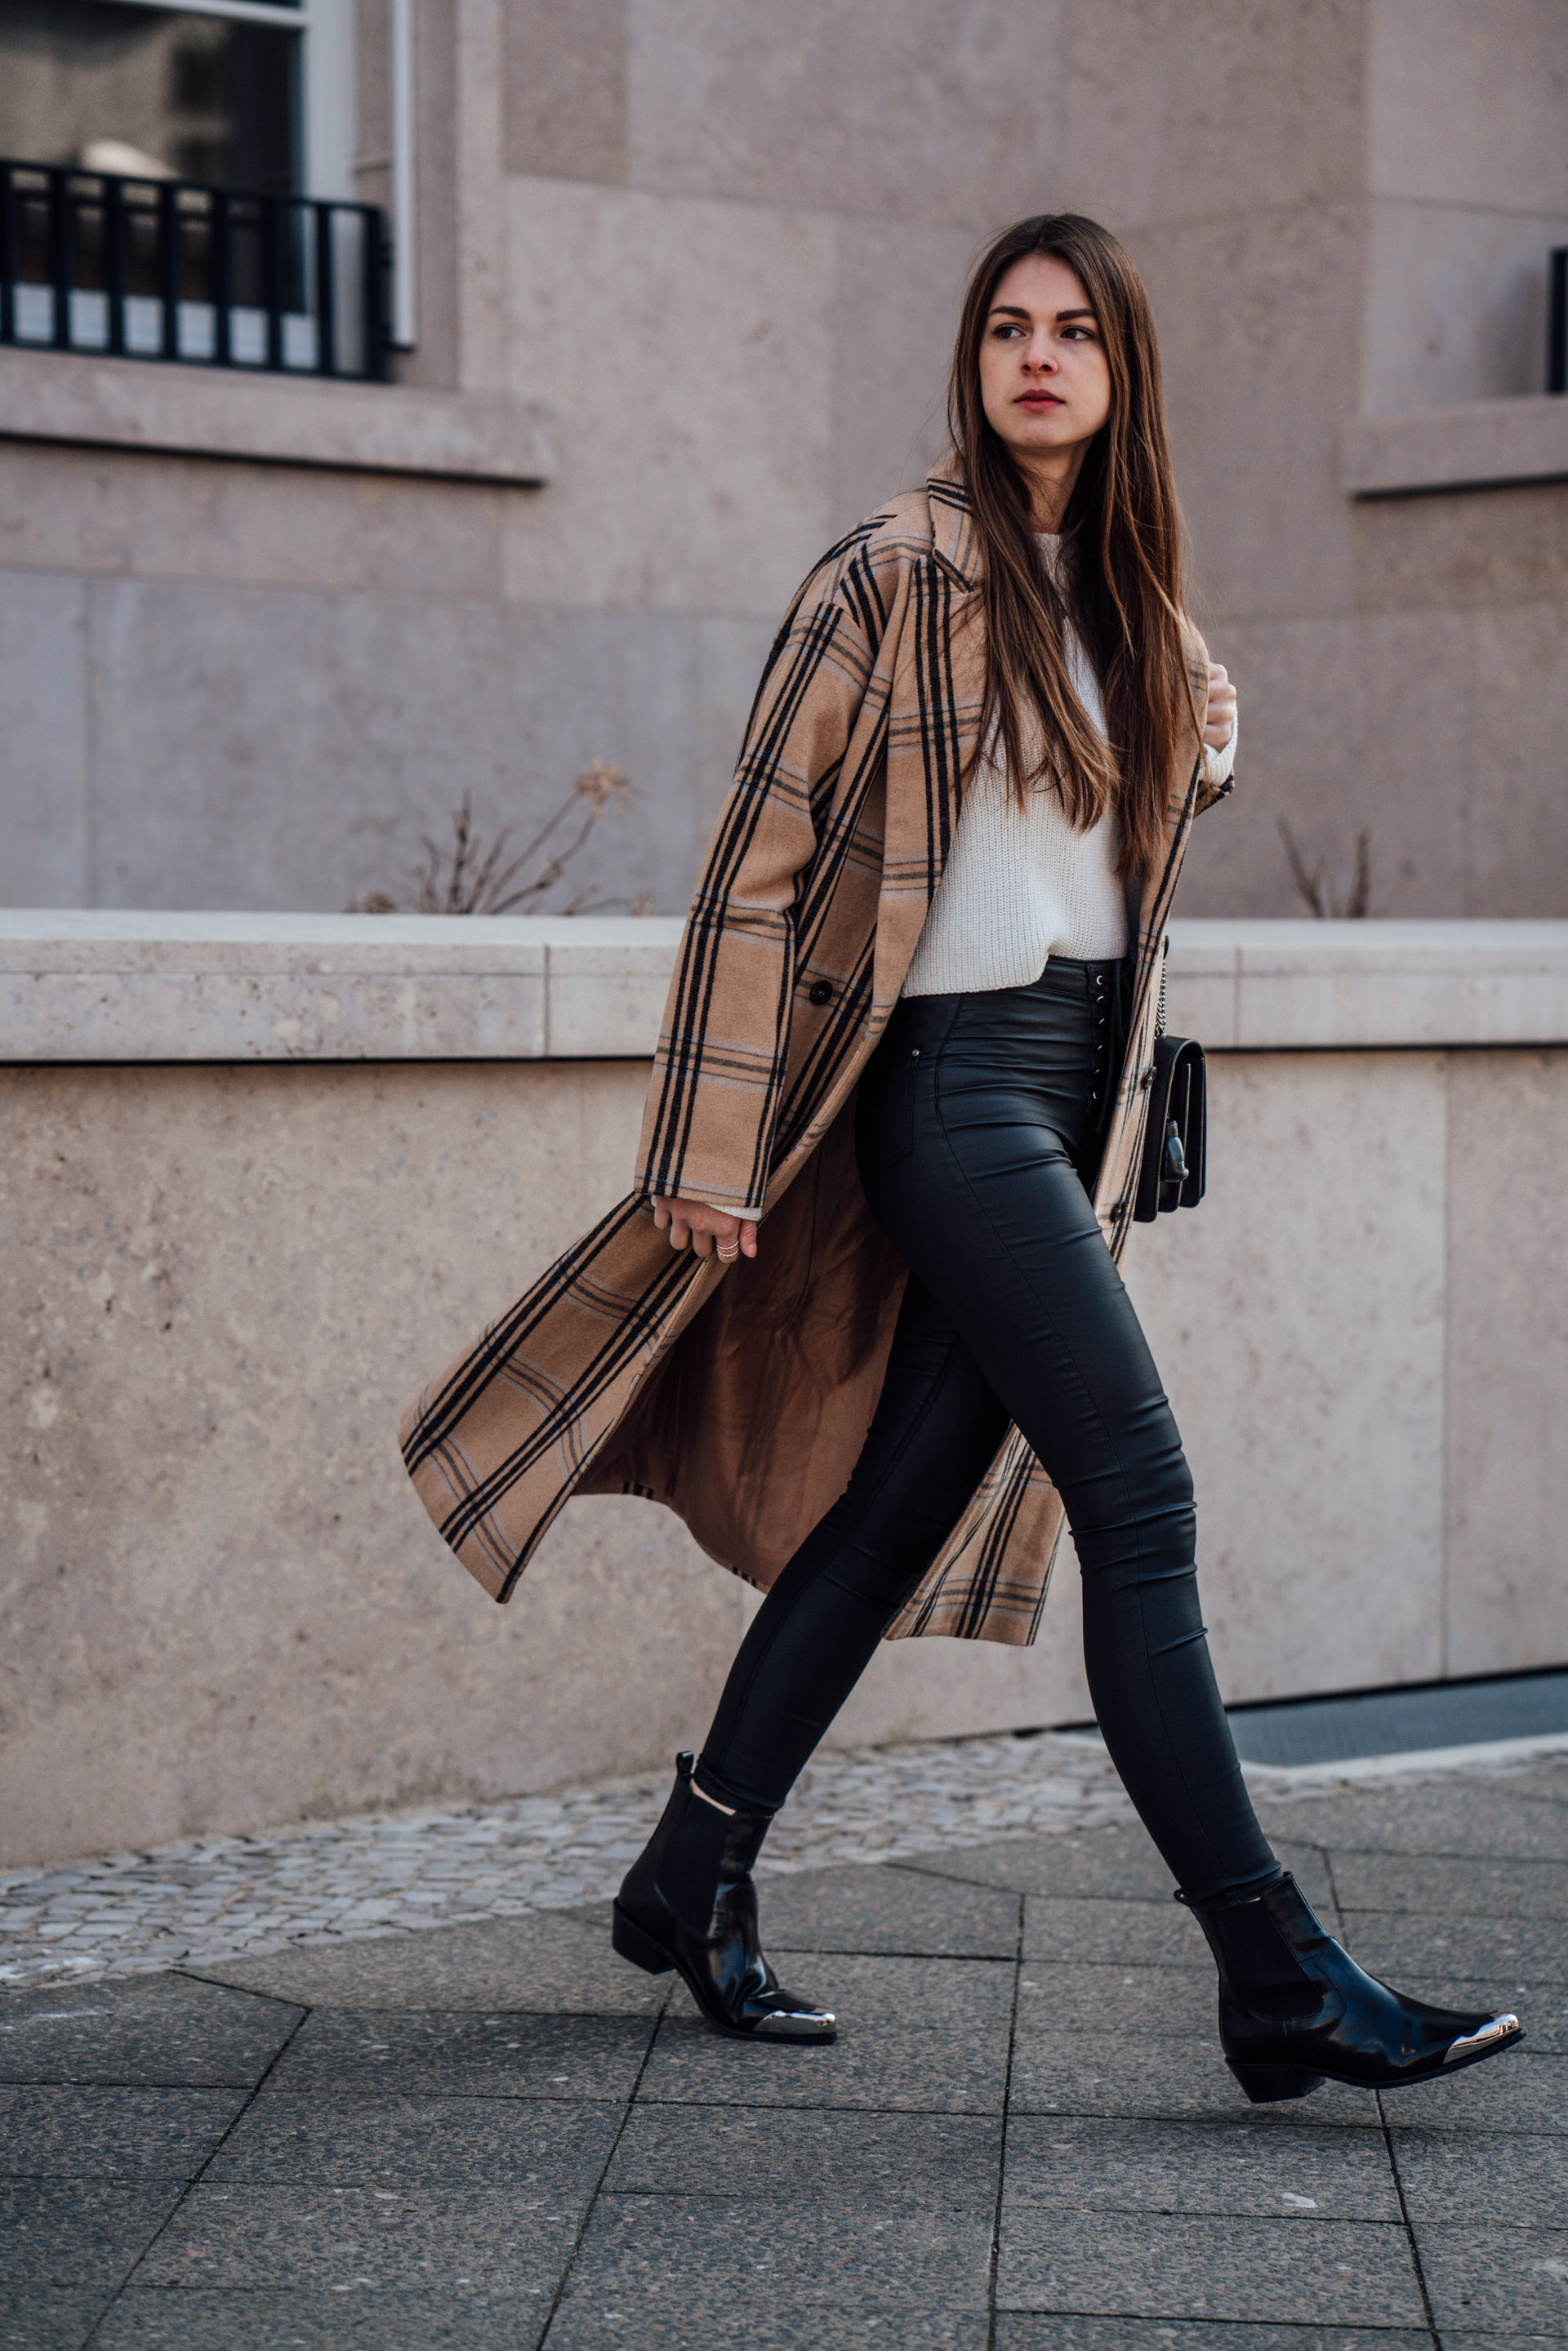 How to wear a plaid camel coat || Modeblog Berlin || Winter Streetstyle